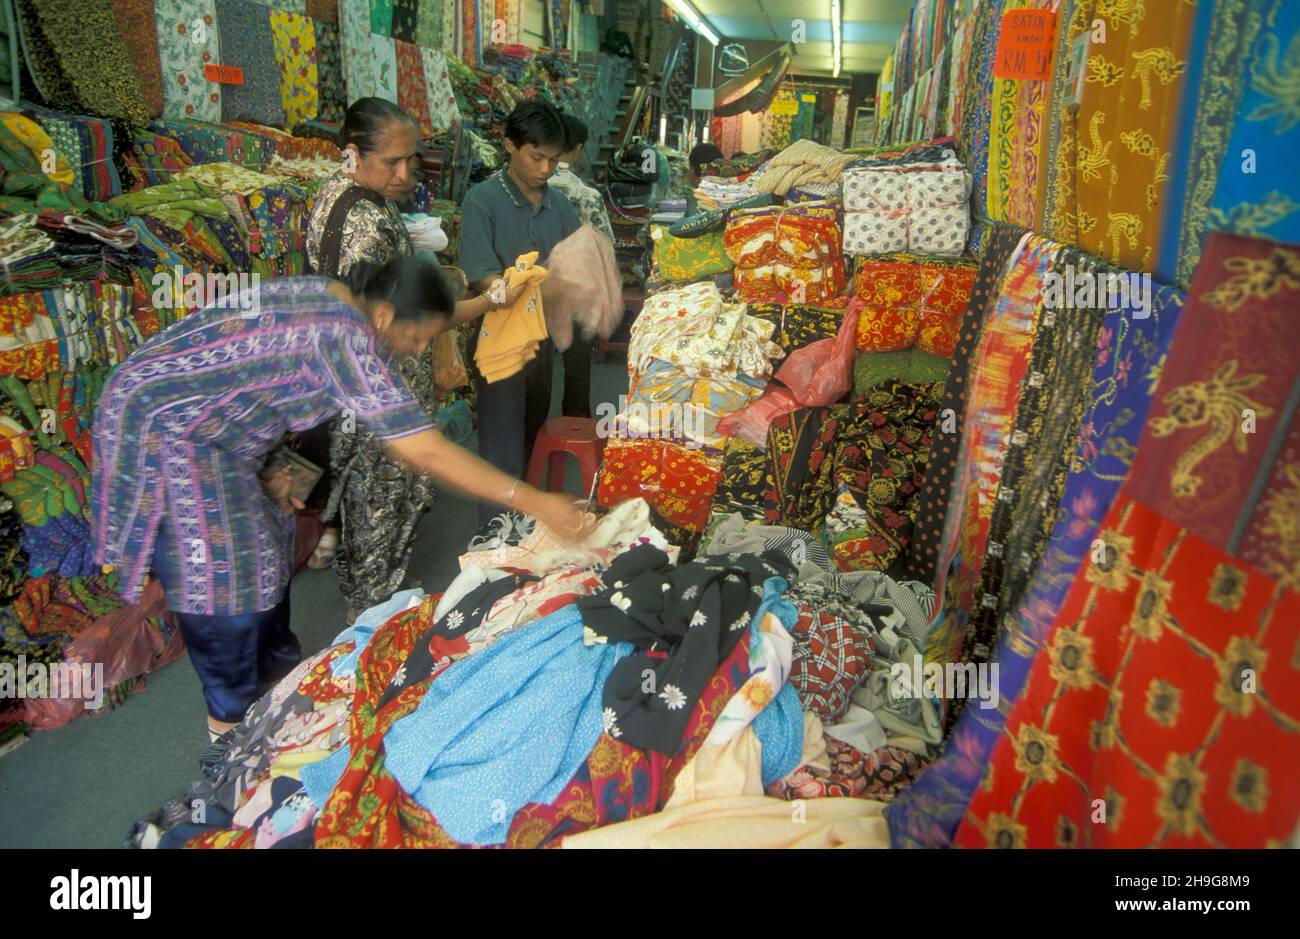 a Batik Textile painting and production in a Factory in the city of Kuala Lumpur in Malaysia.  Malaysia, Kuala Lumpur, August, 1997 Stock Photo